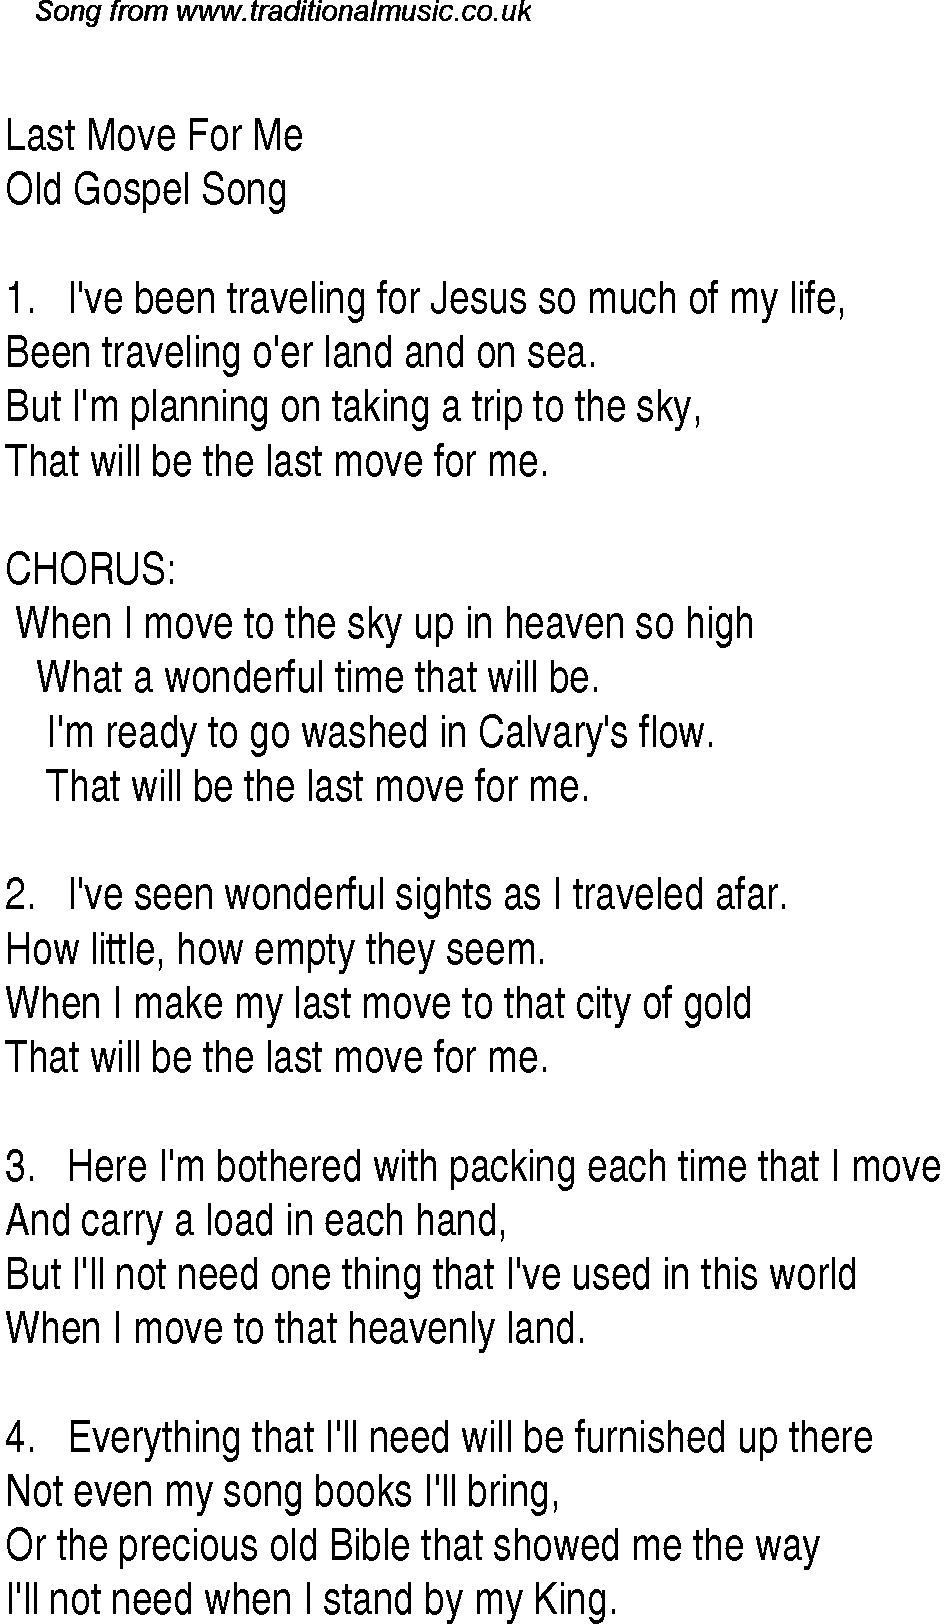 Gospel Song: last-move-for-me, lyrics and chords.